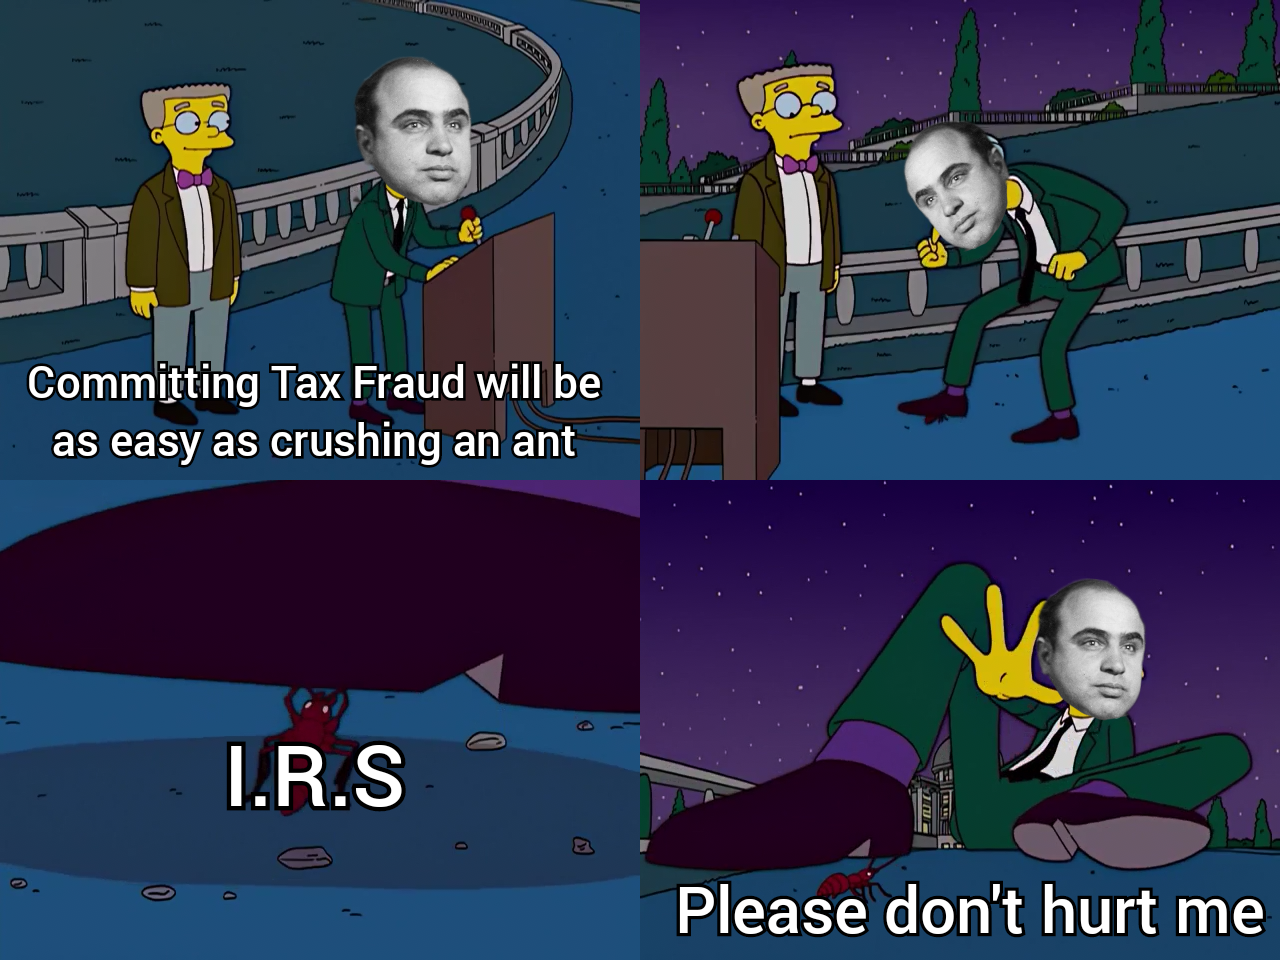 Remember kids, pay your taxes